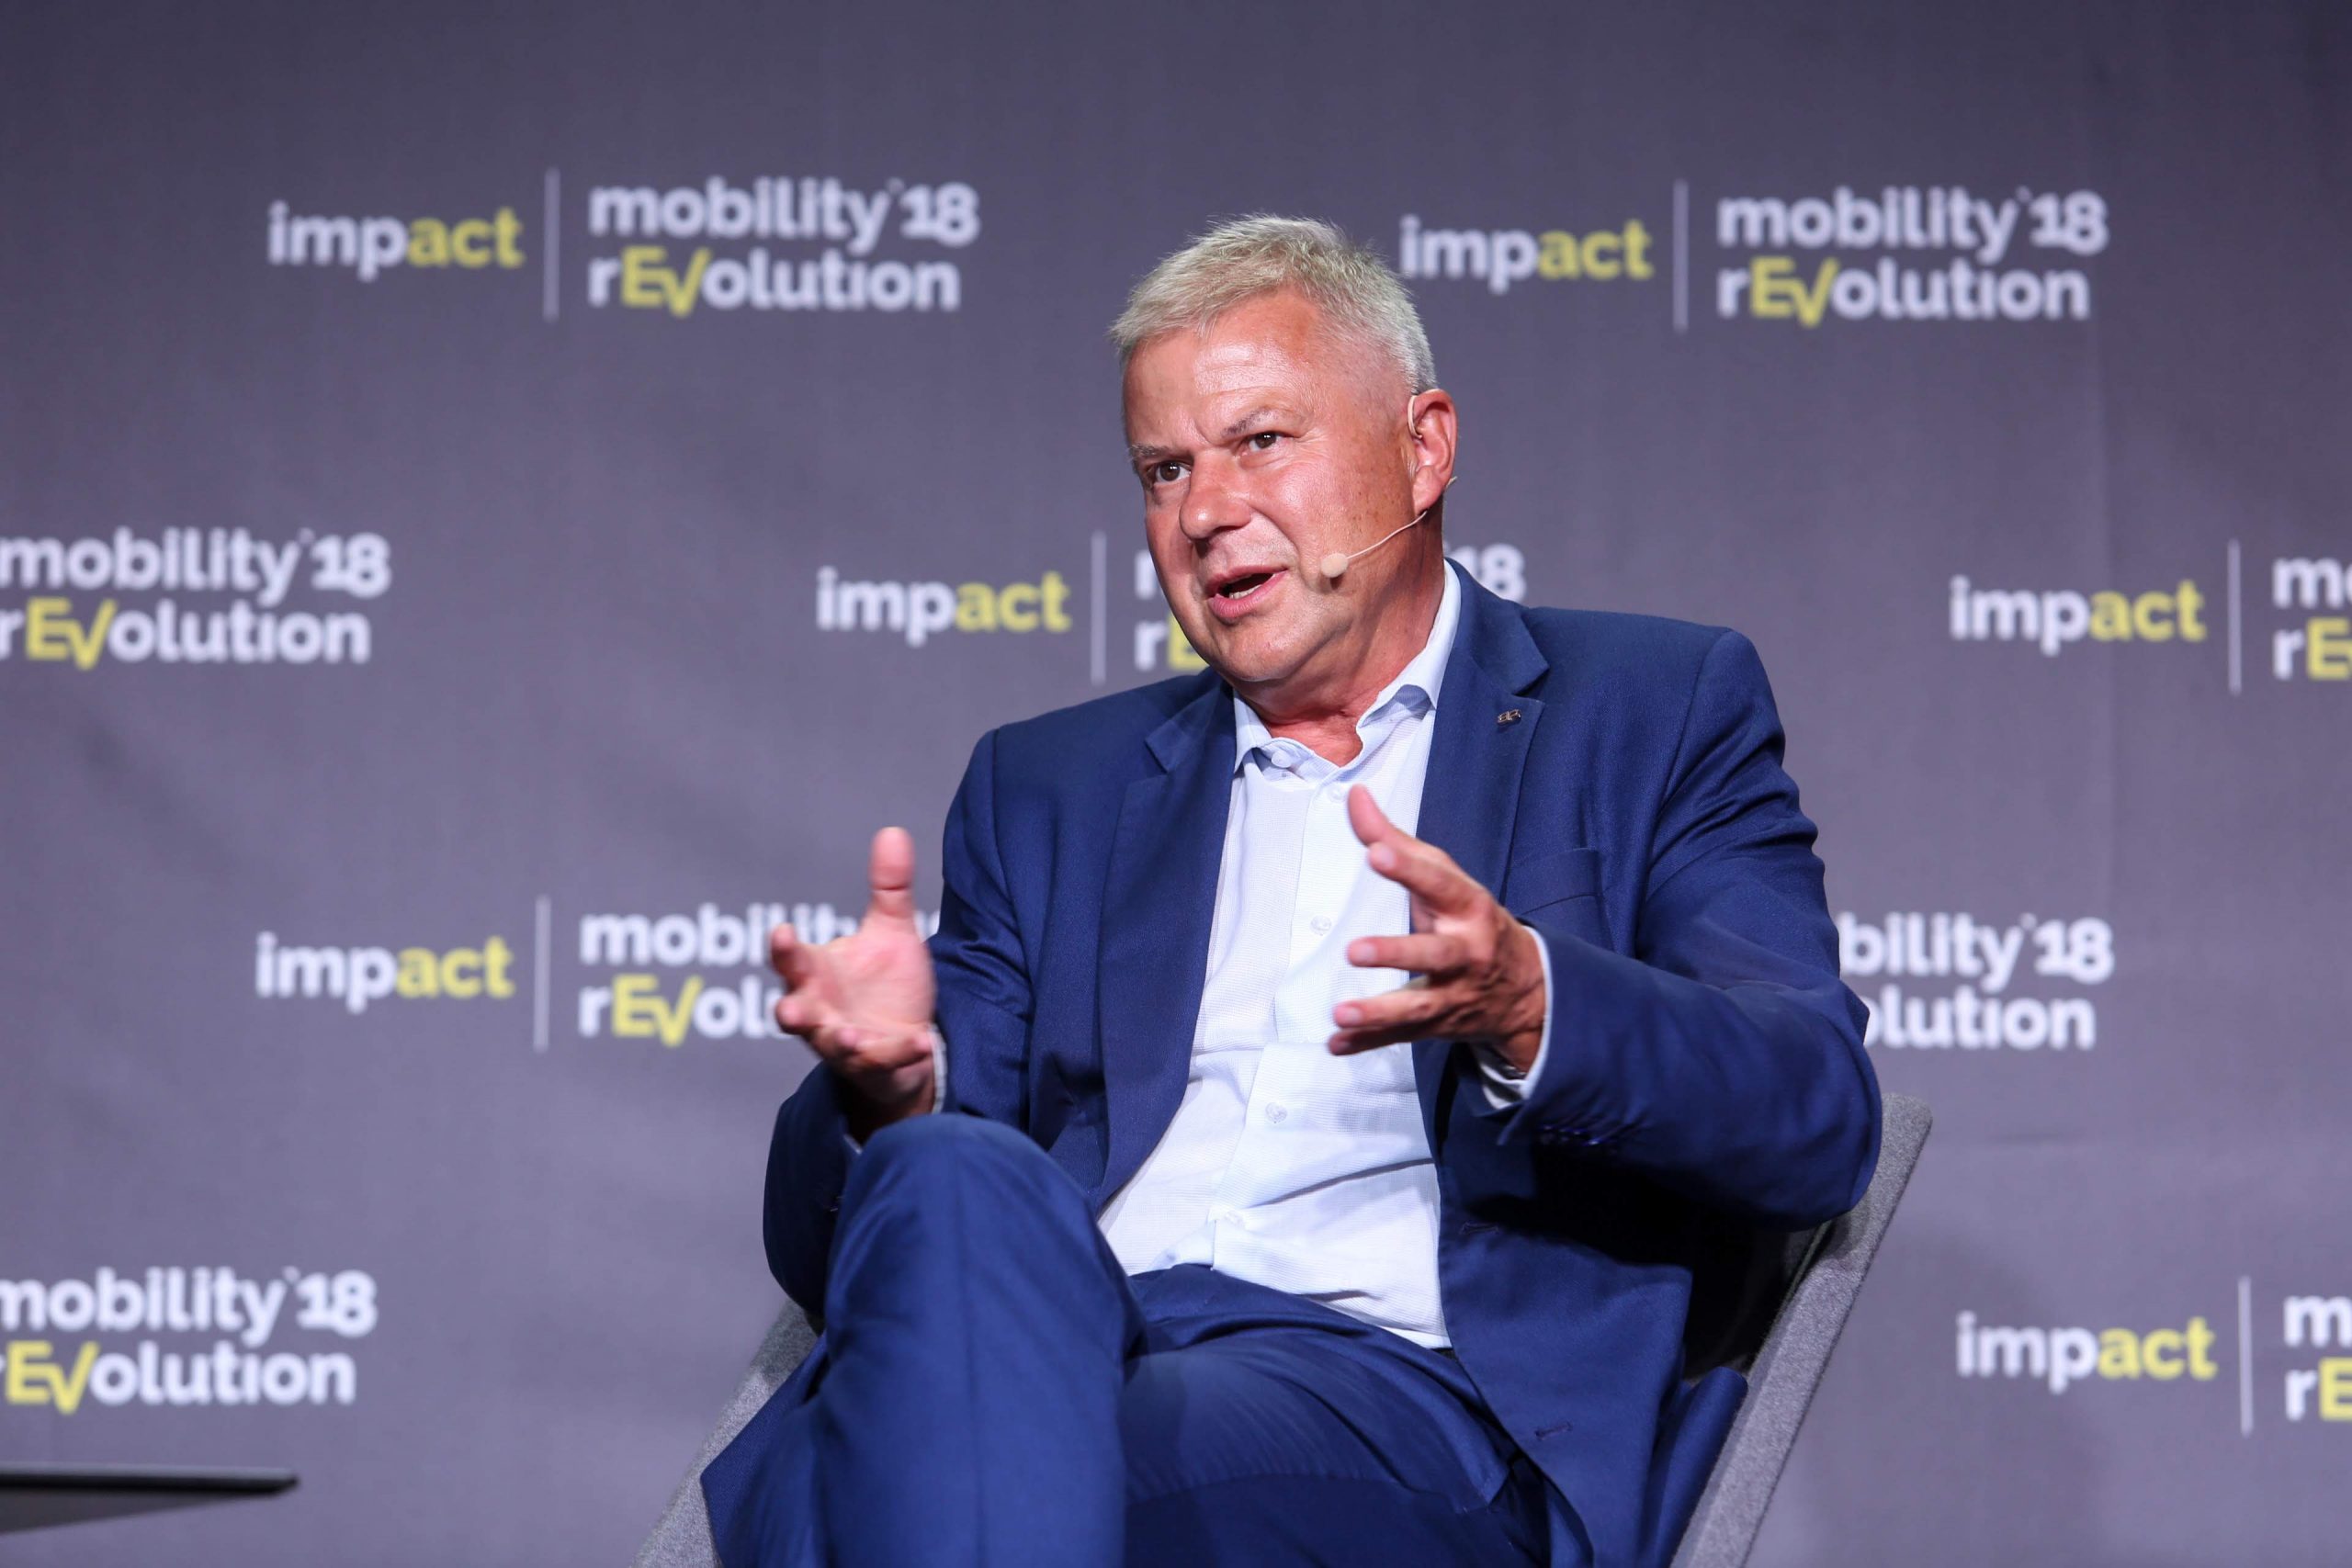 NCBR Discusses The Future Of Mobility in Poland At Impact mobility rEVolution’18